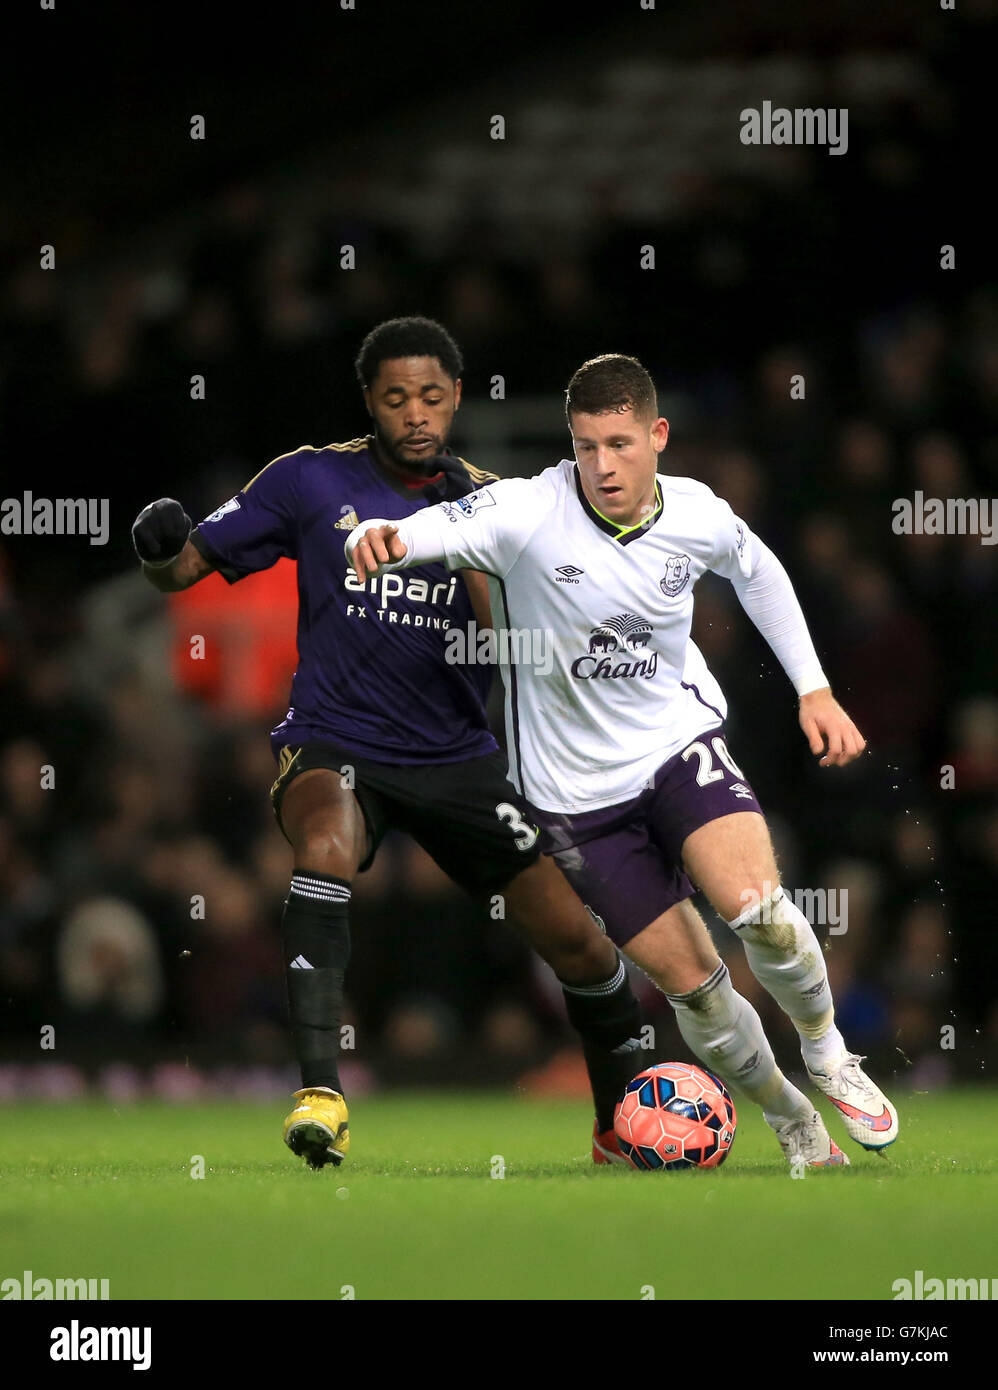 West Ham United's Alex Song (left) and Everton's Ross Barkley battle for the ball during the FA Cup Third Round replay match at Upton Park, London. Stock Photo